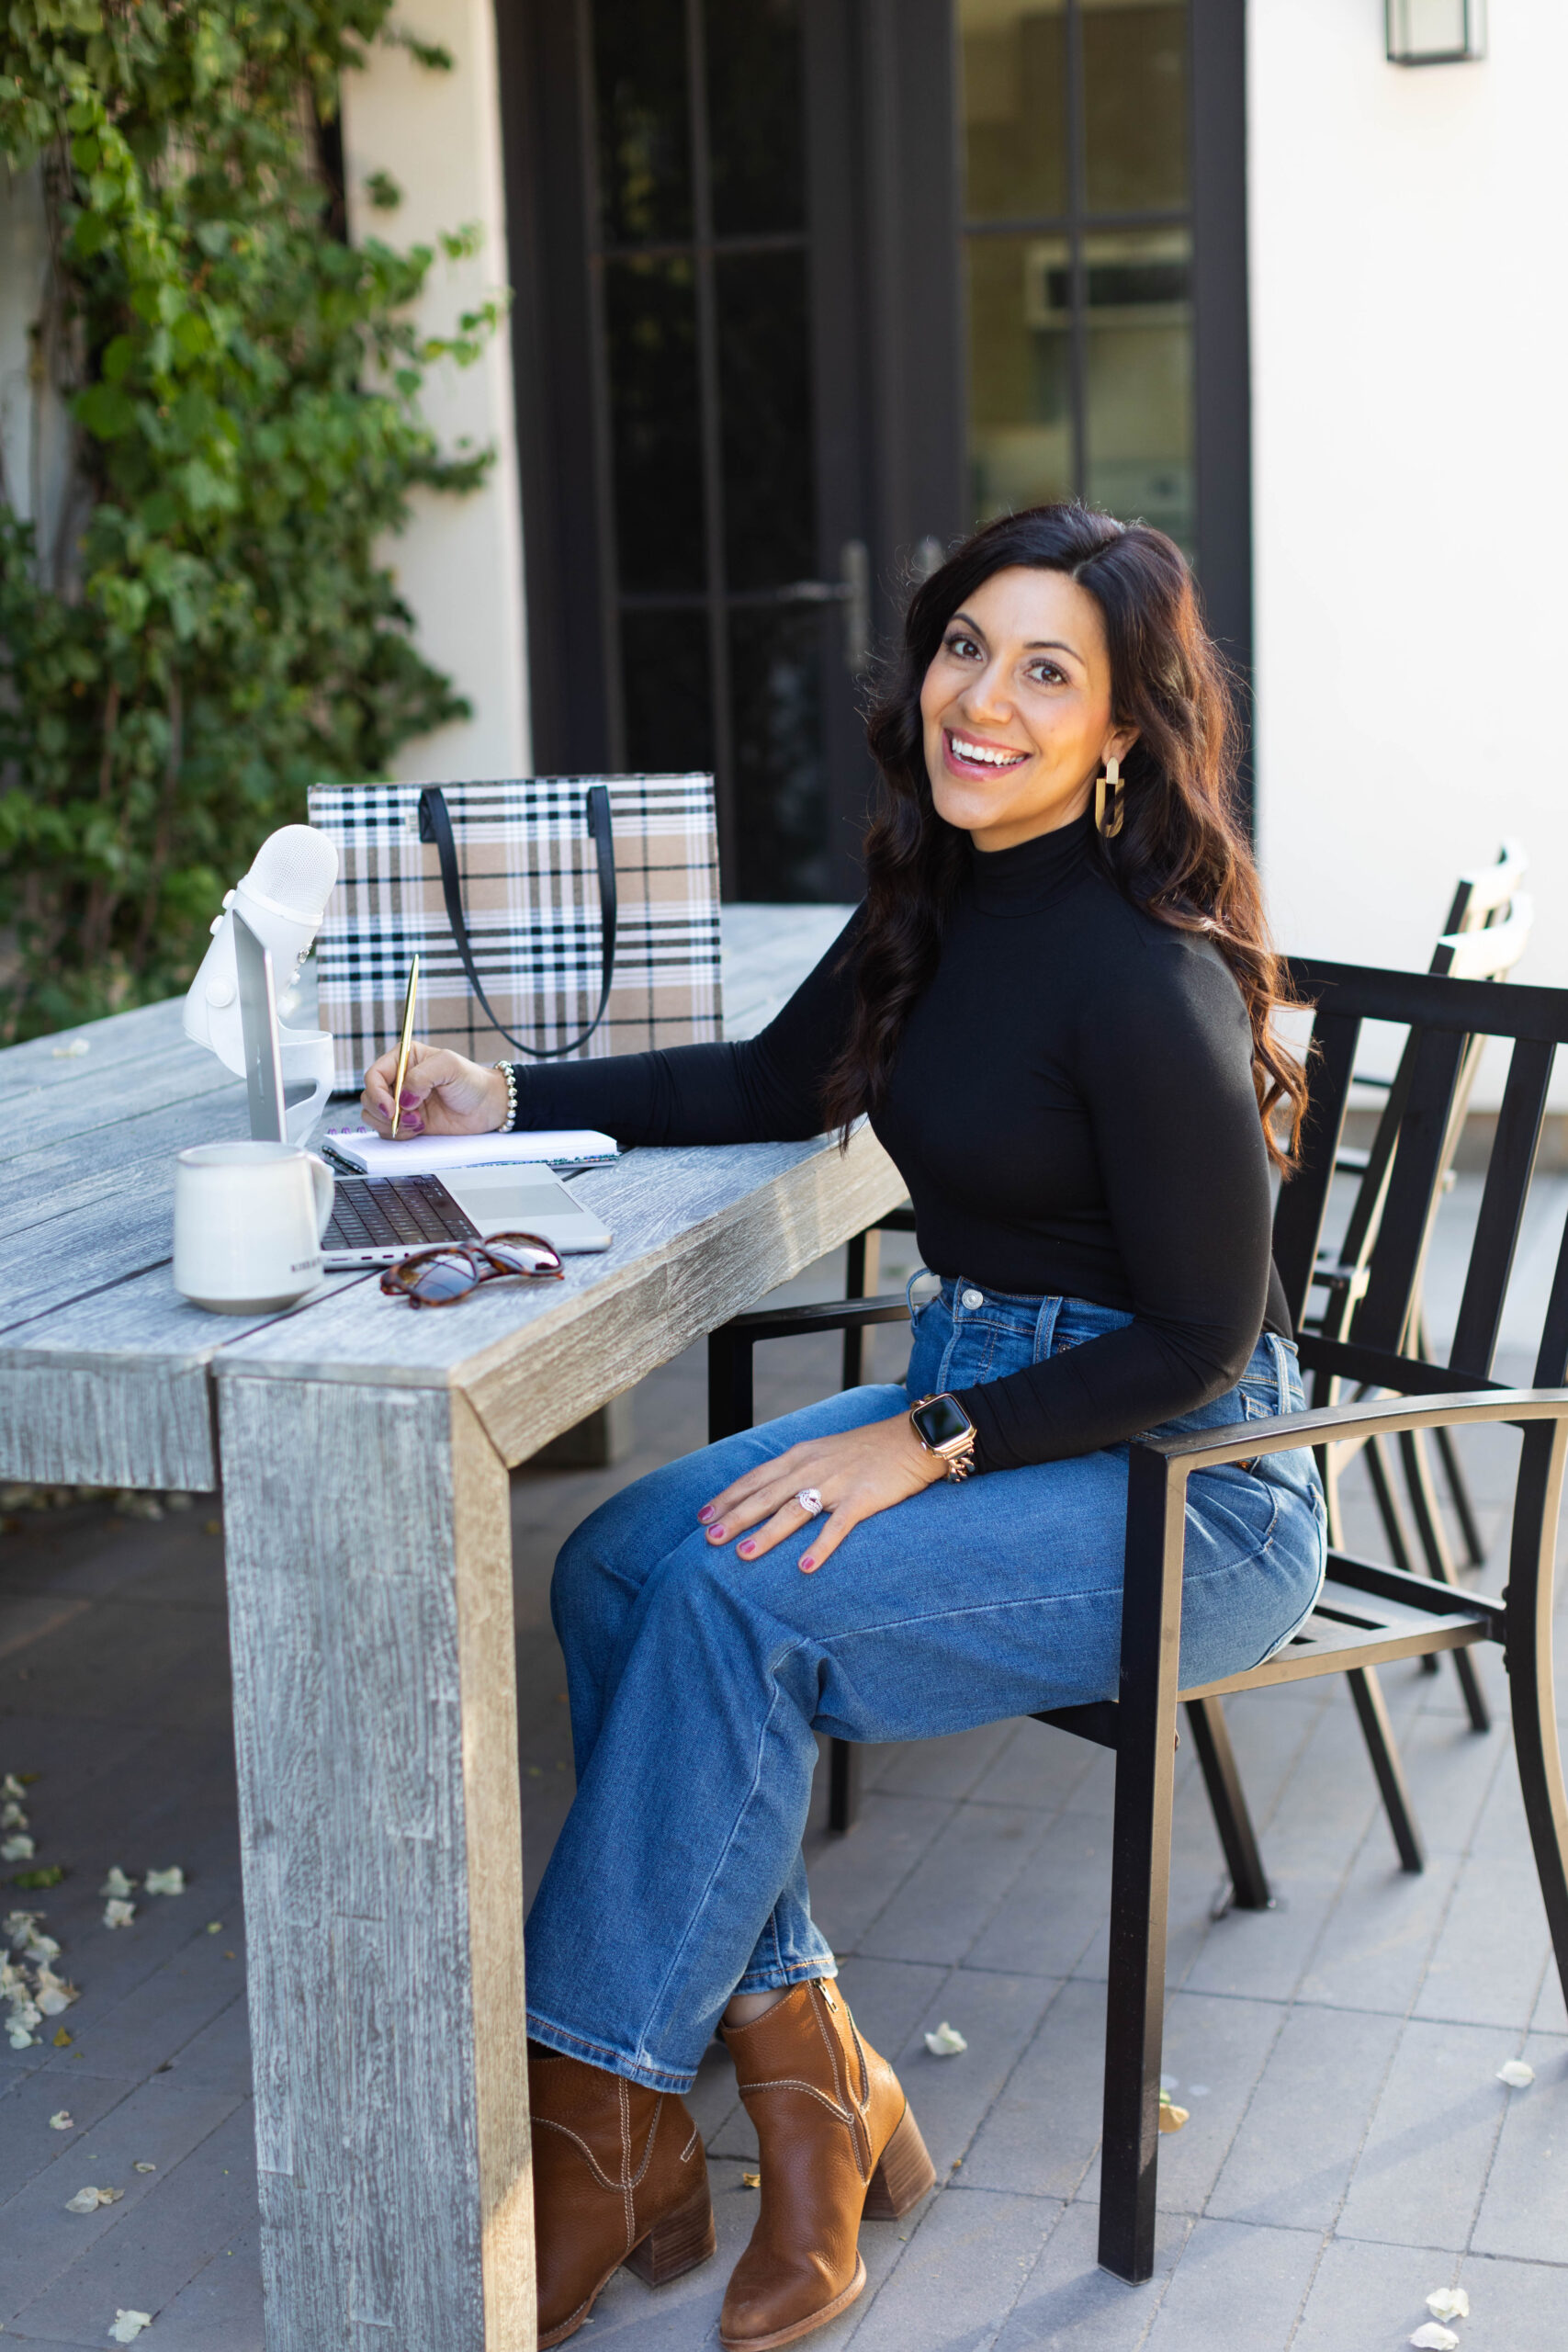 Brown haired woman sitting at table outside with laptop, drink, sunglasses, purse and she's wearing a black shirt with jeans and boots.